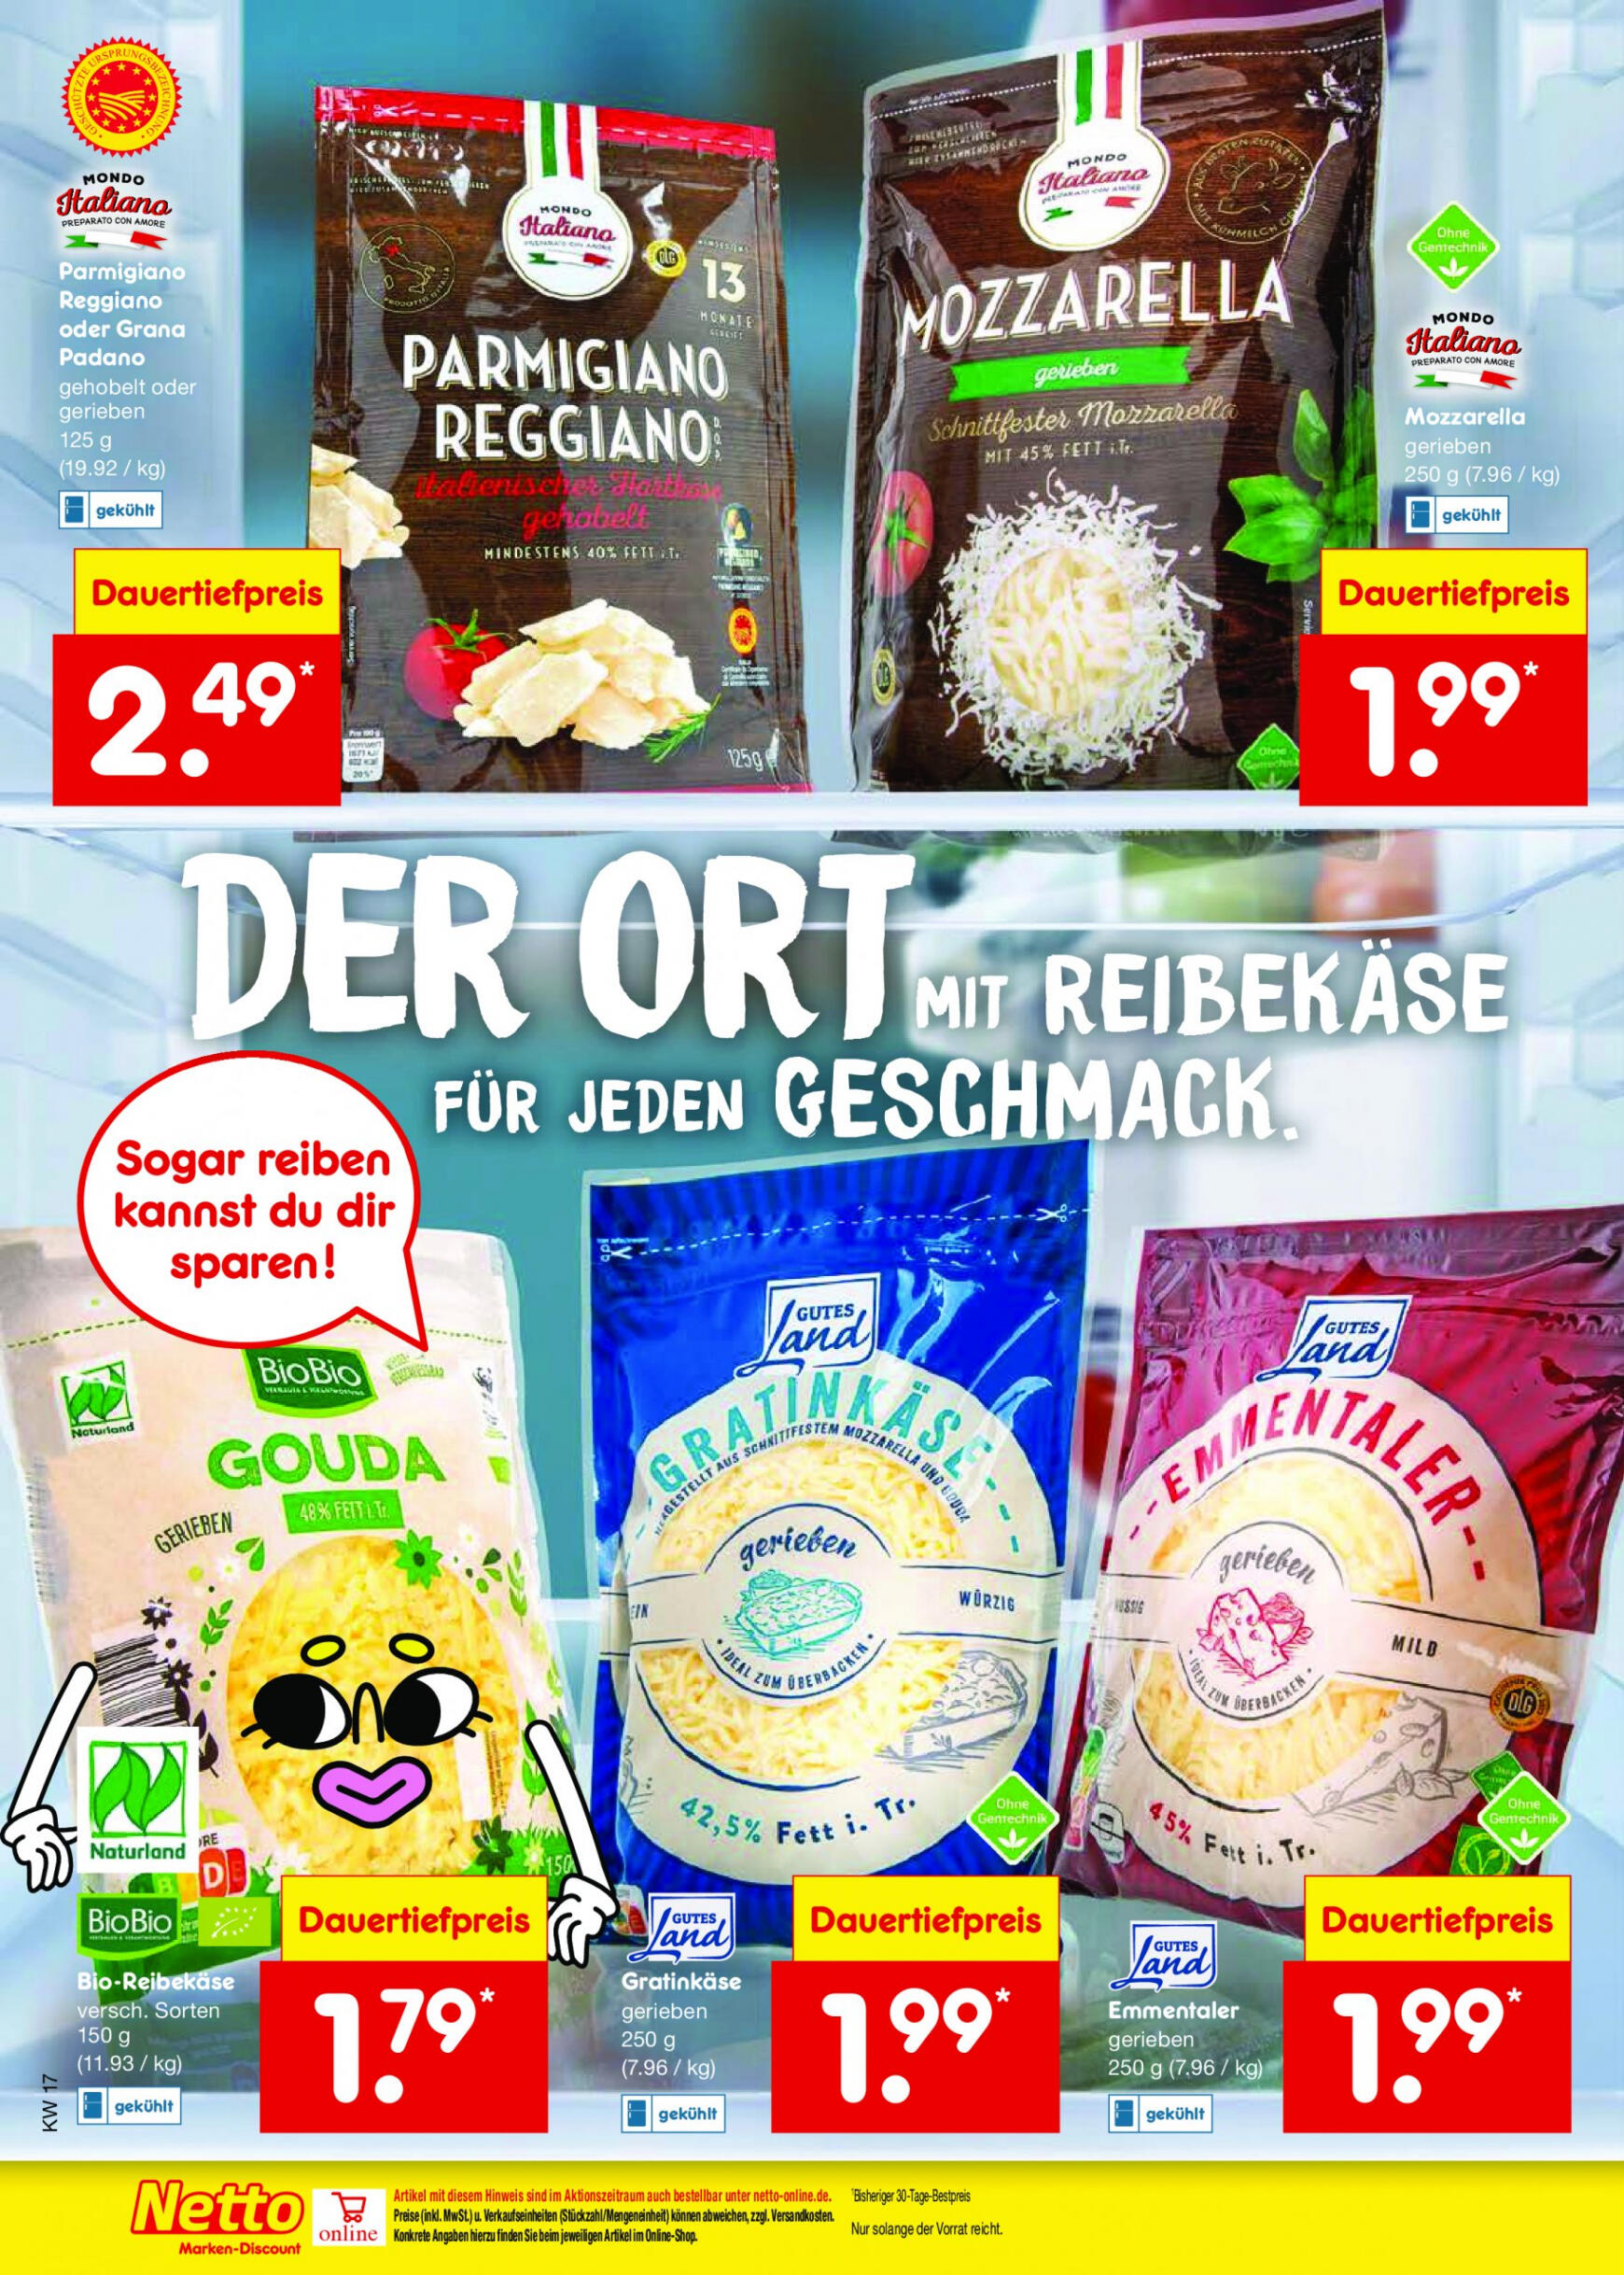 netto - Flyer Netto aktuell 22.04. - 27.04. - page: 14